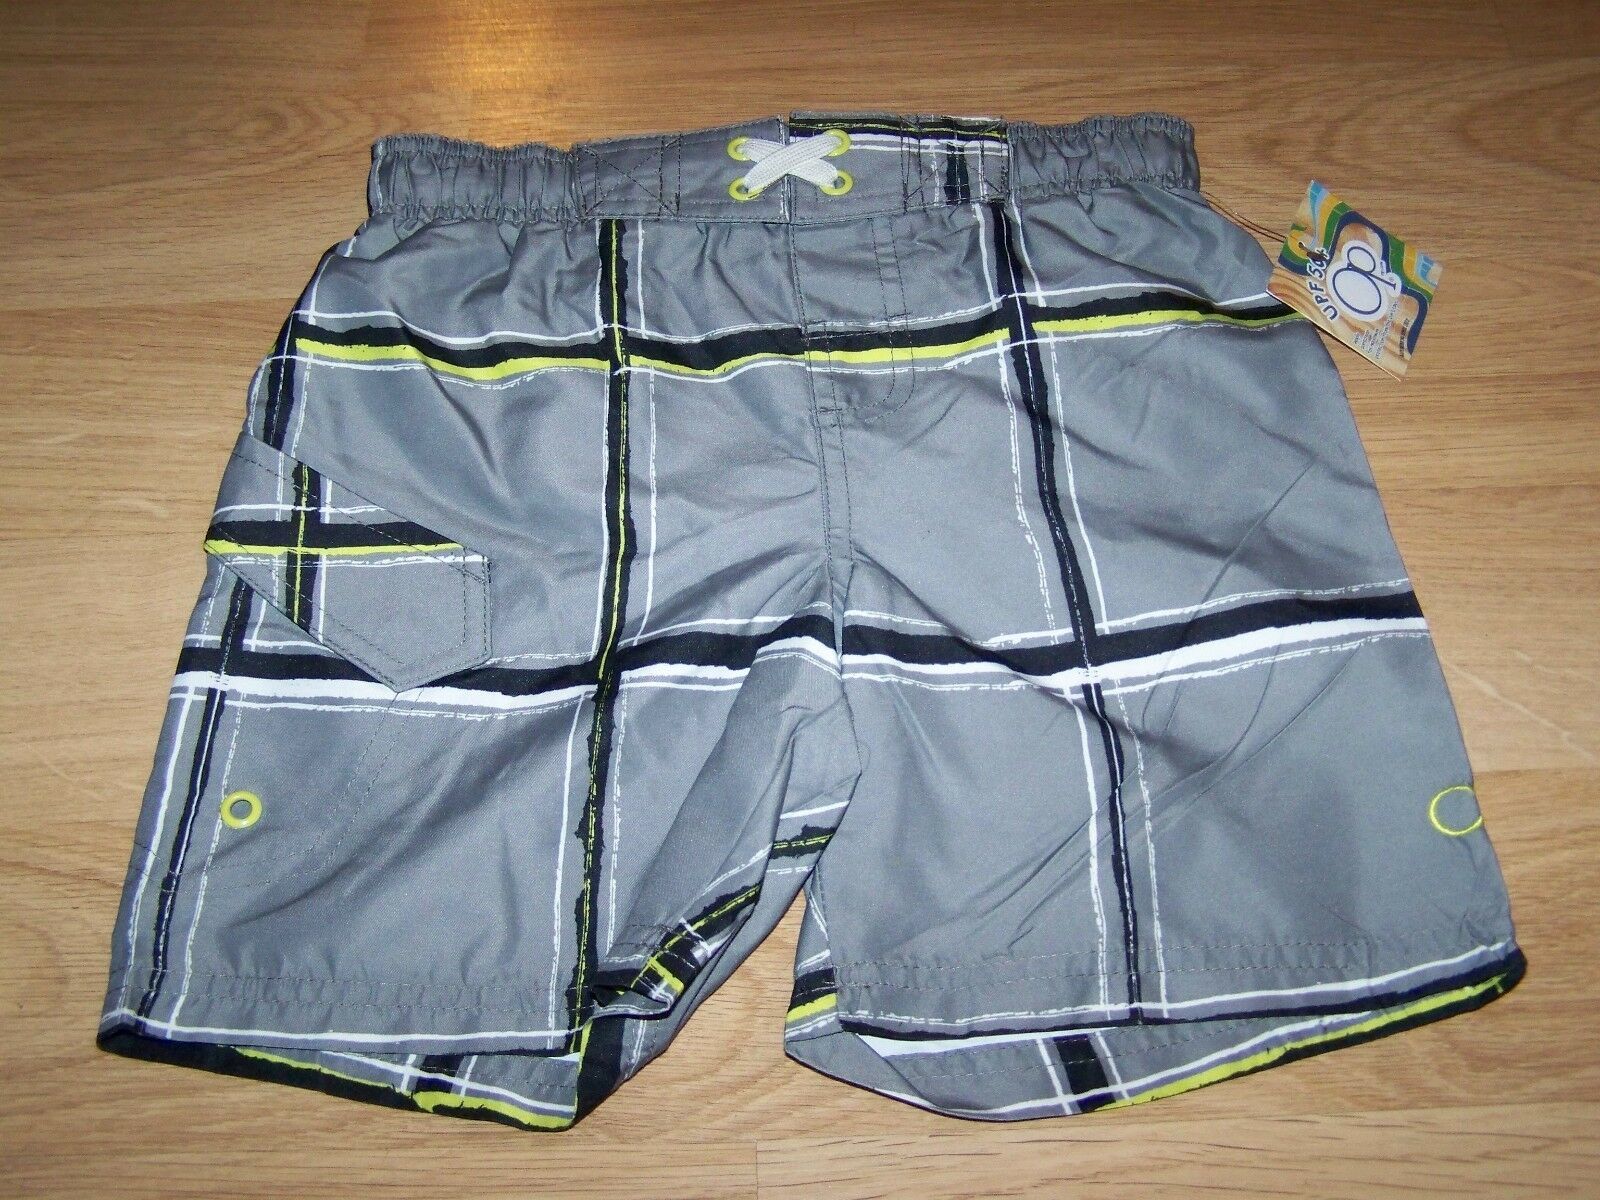 Size XS 4-5 OP Ocean Pacific Board Shorts Swim Trunks Gray Black White Lime New - $12.00